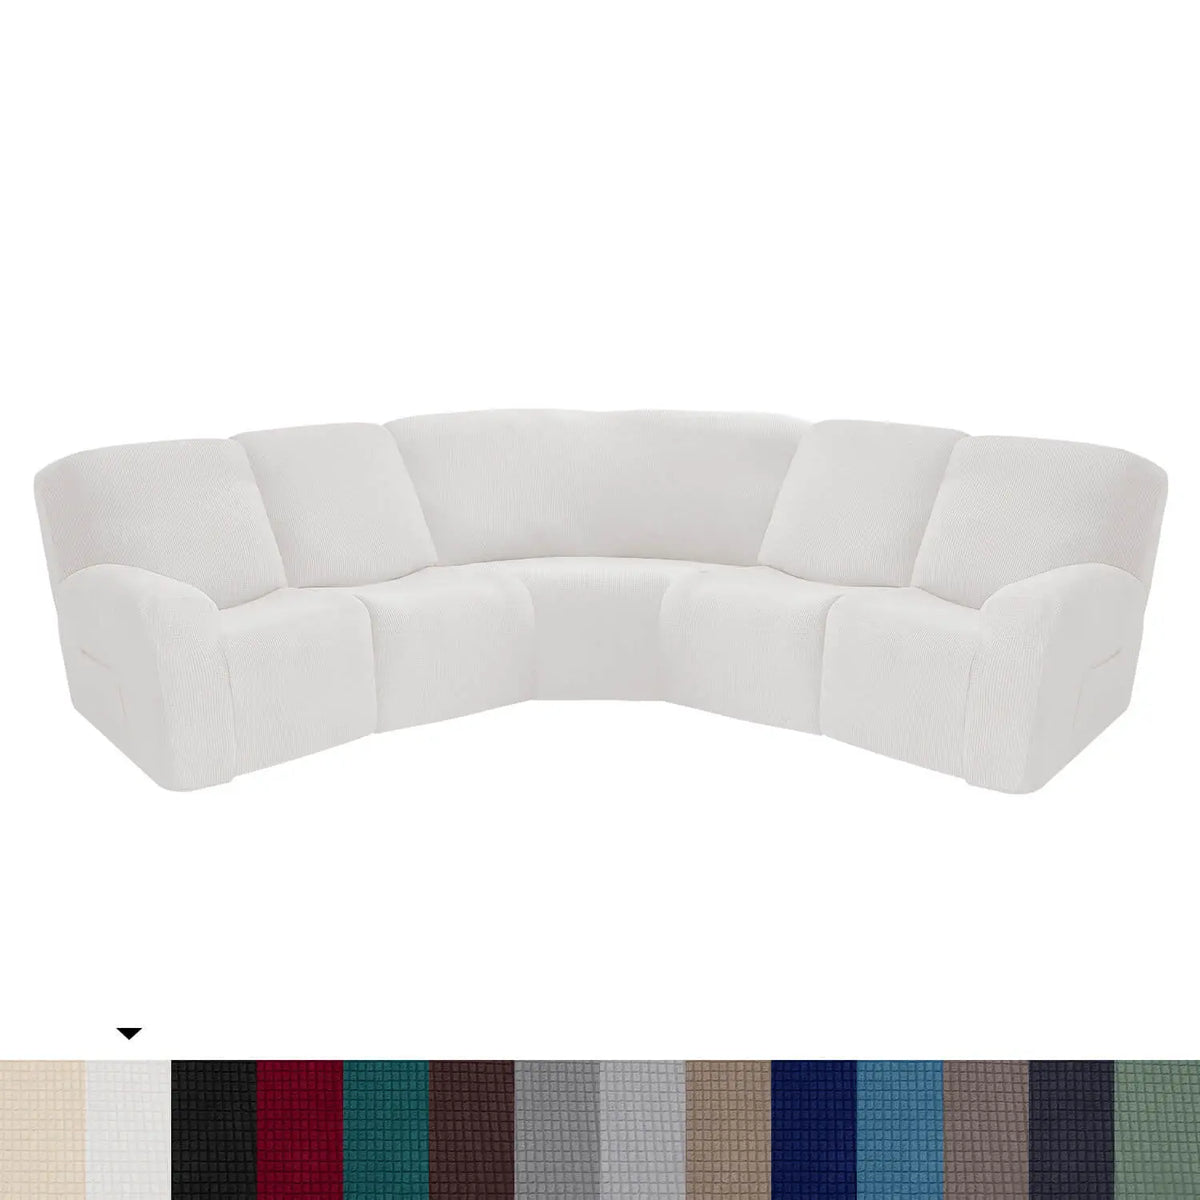 Crfatop L Shape Sectional Recliner Sofa Covers Corner Couch Covers White